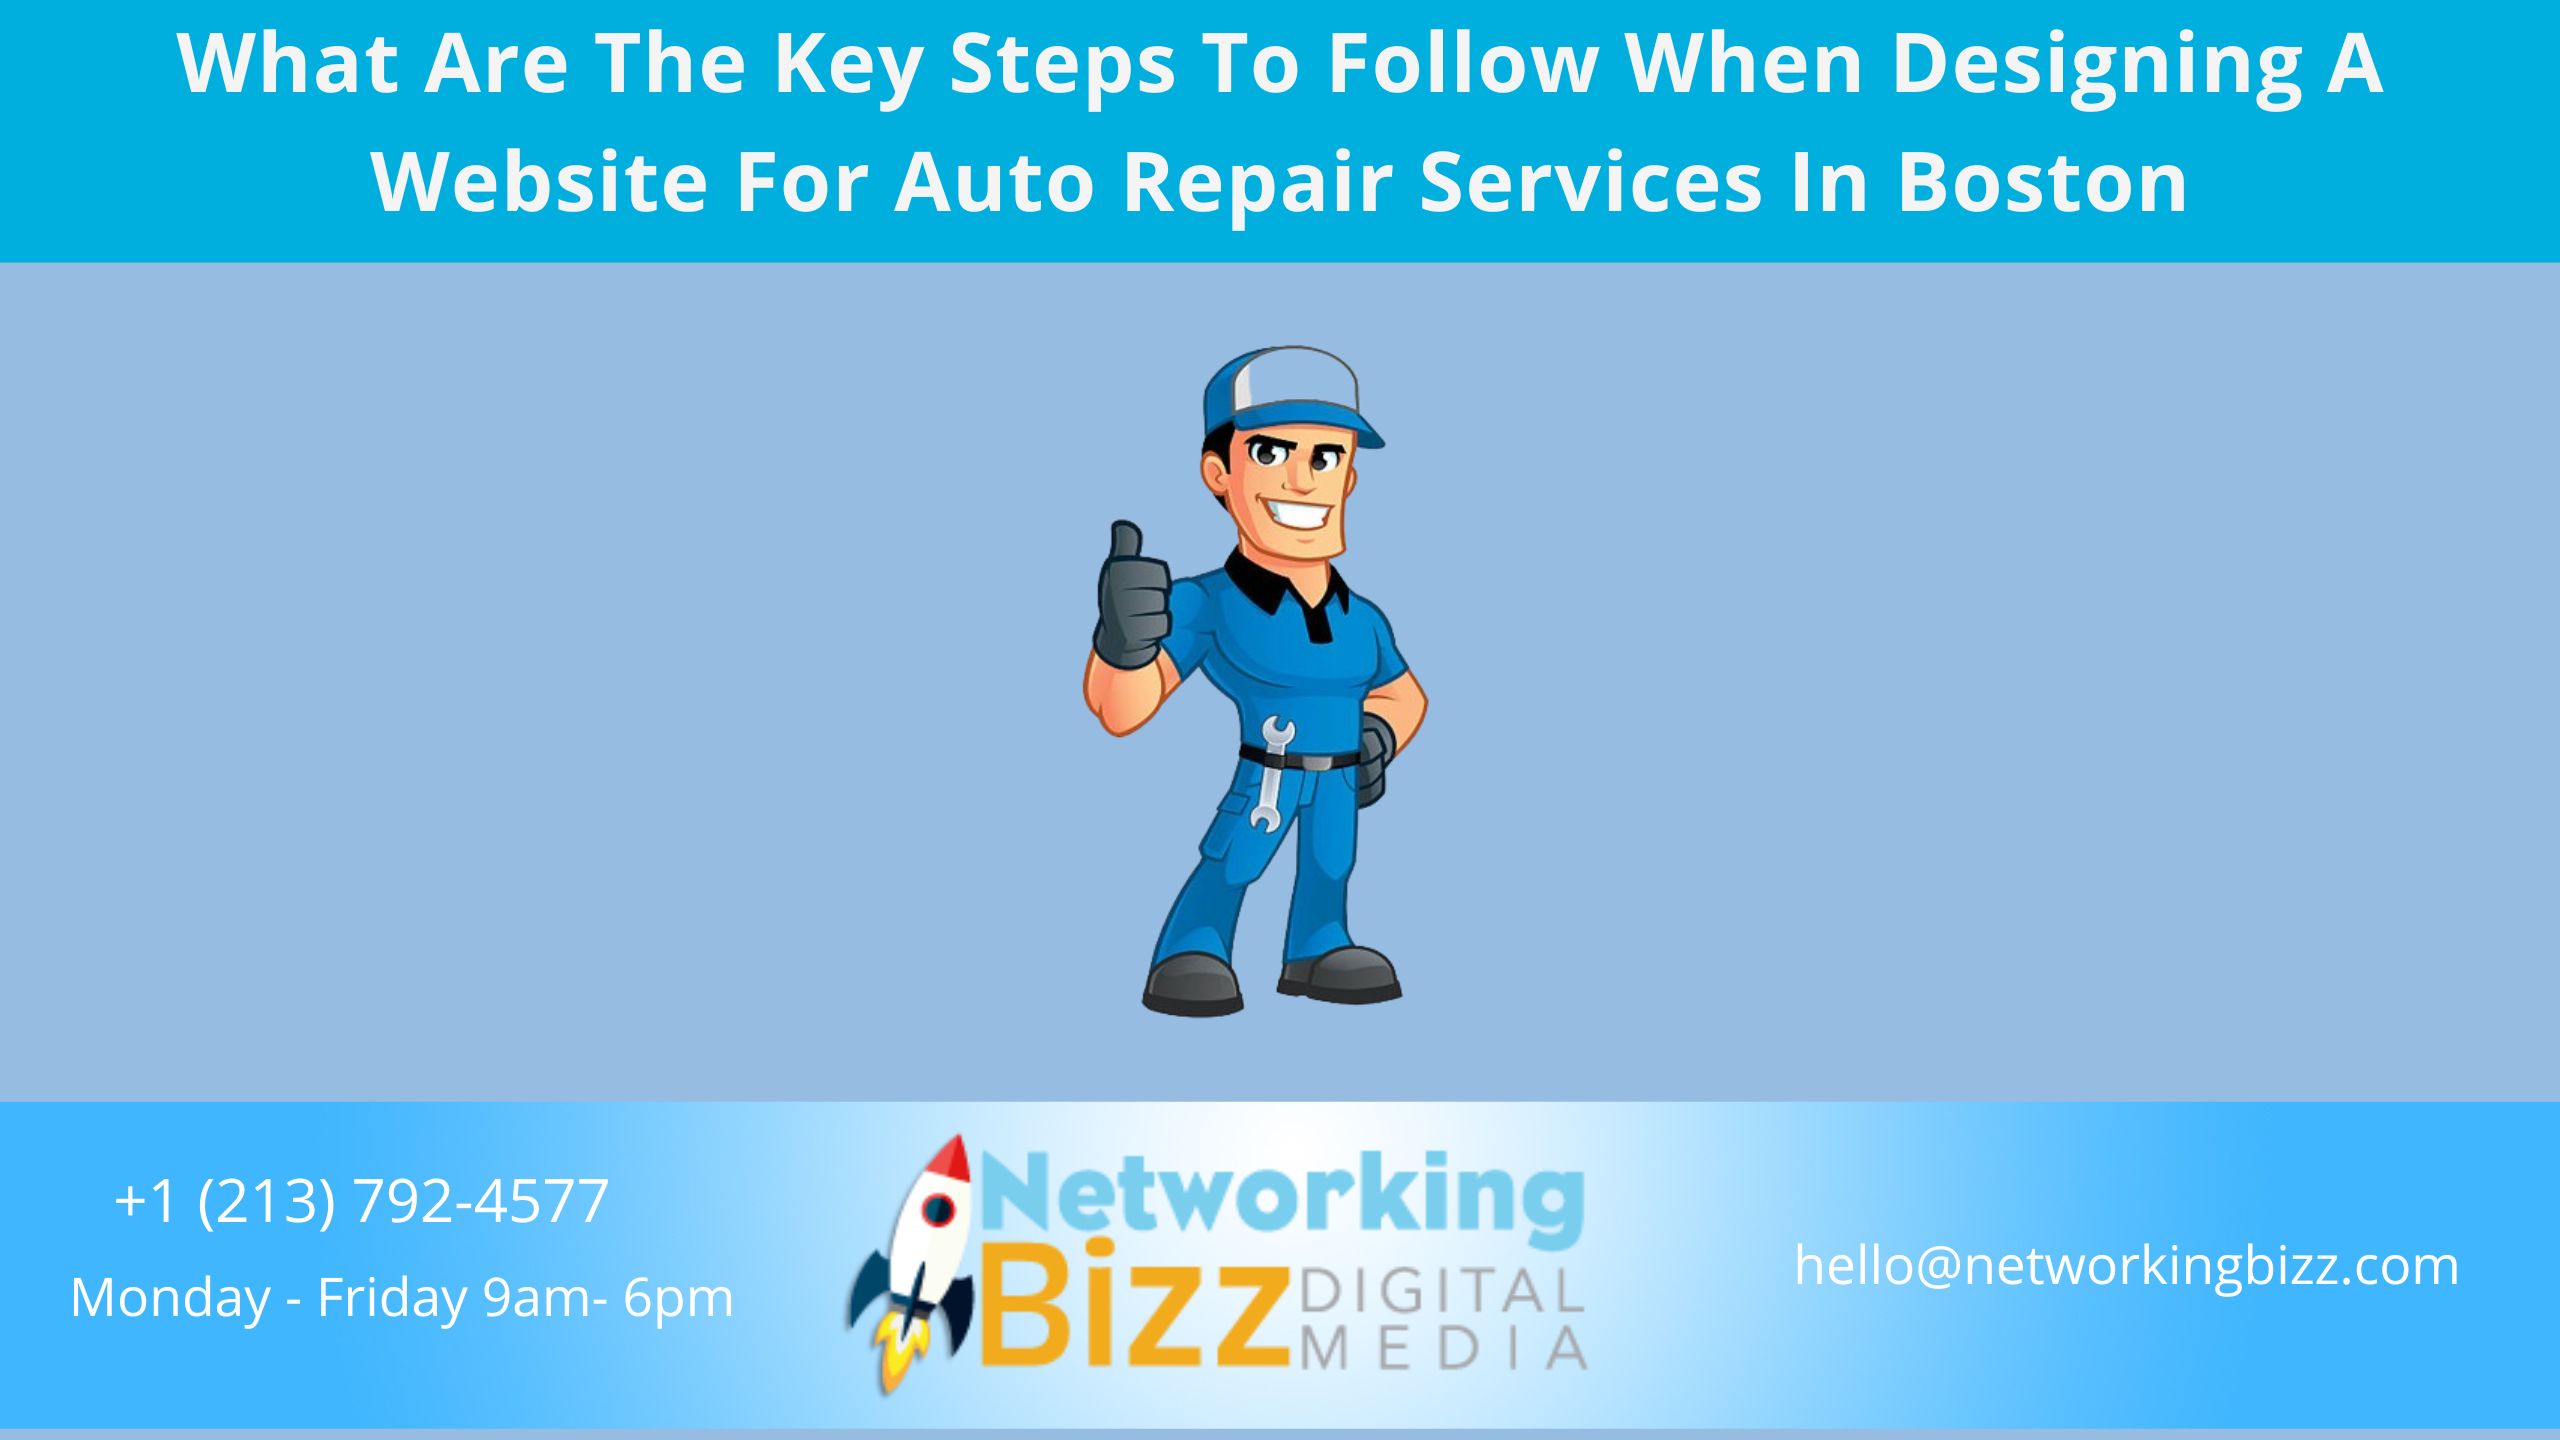 What Are The Key Steps To Follow When Designing A Website For Auto Repair Services In Boston